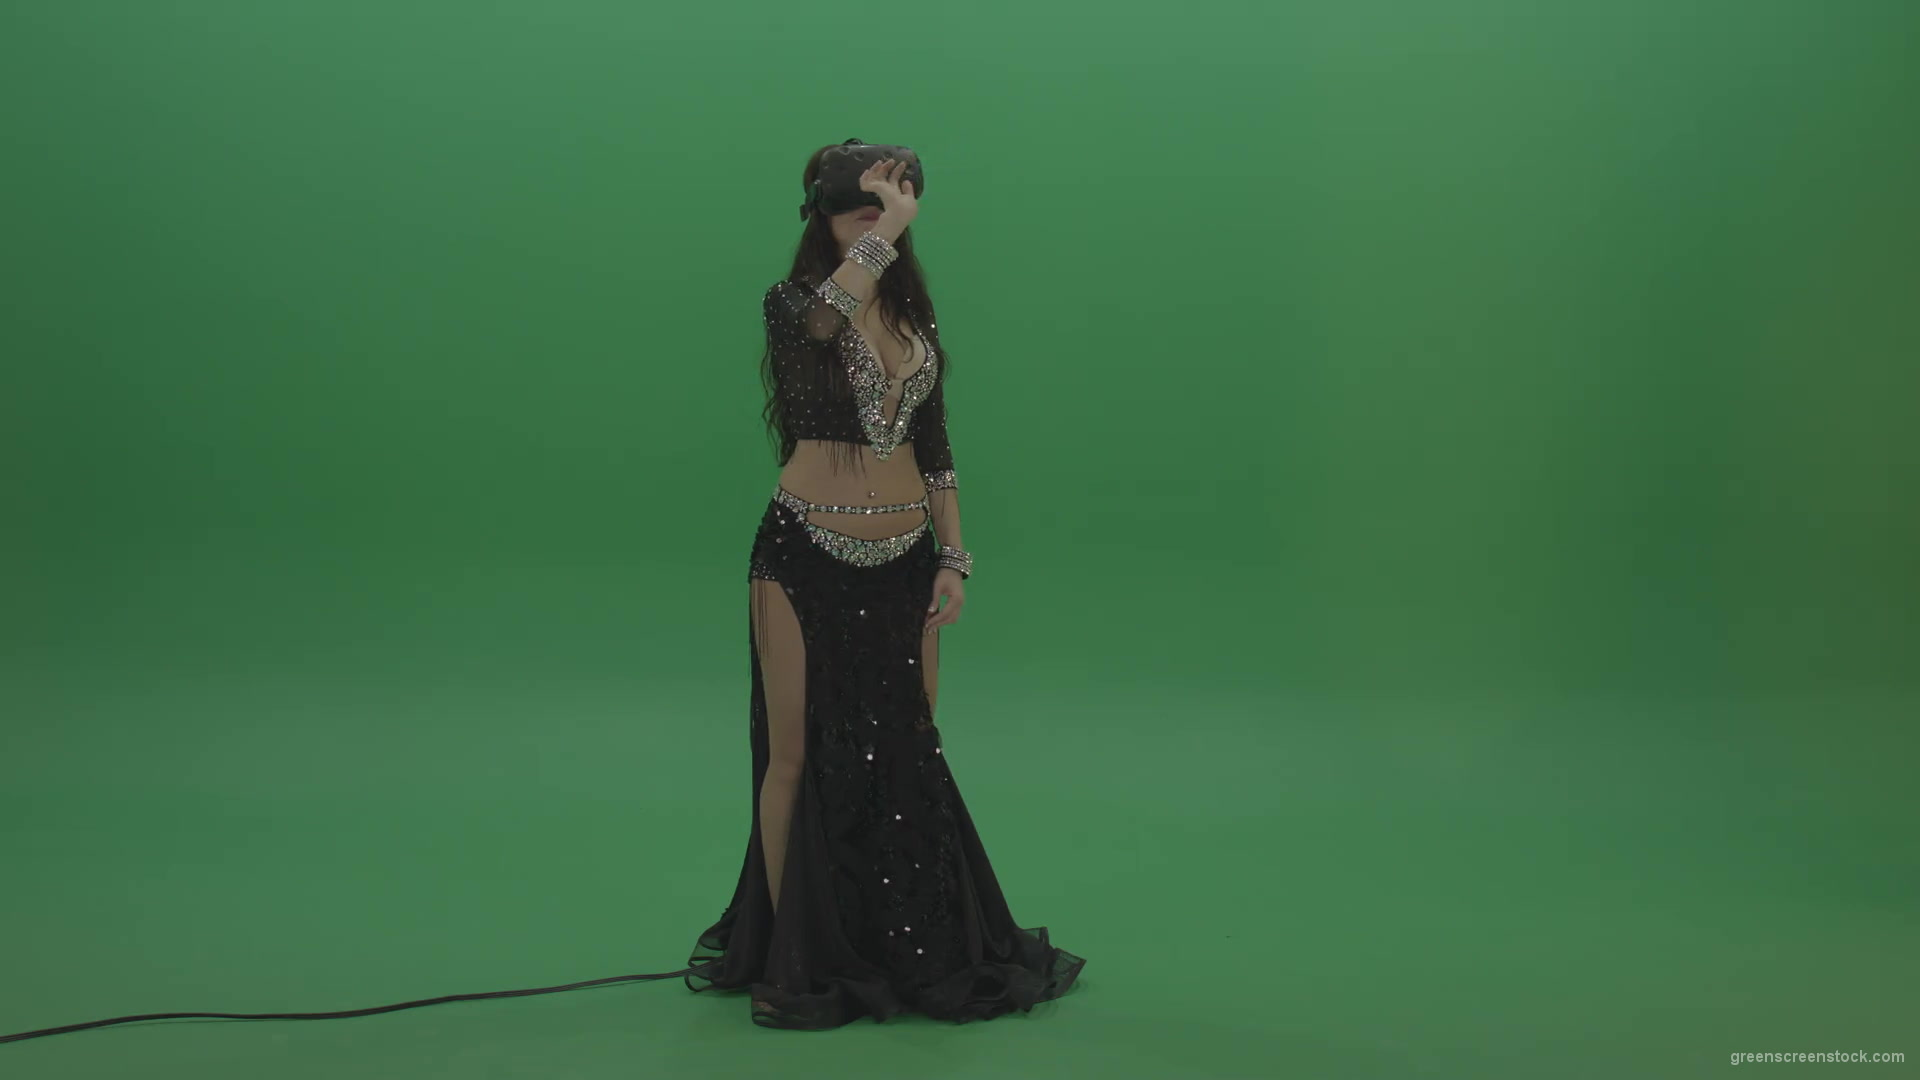 Beautiful-belly-dancer-in-VR-headset-operates-invisible-screen-over-green-screen-background-1920_006 Green Screen Stock